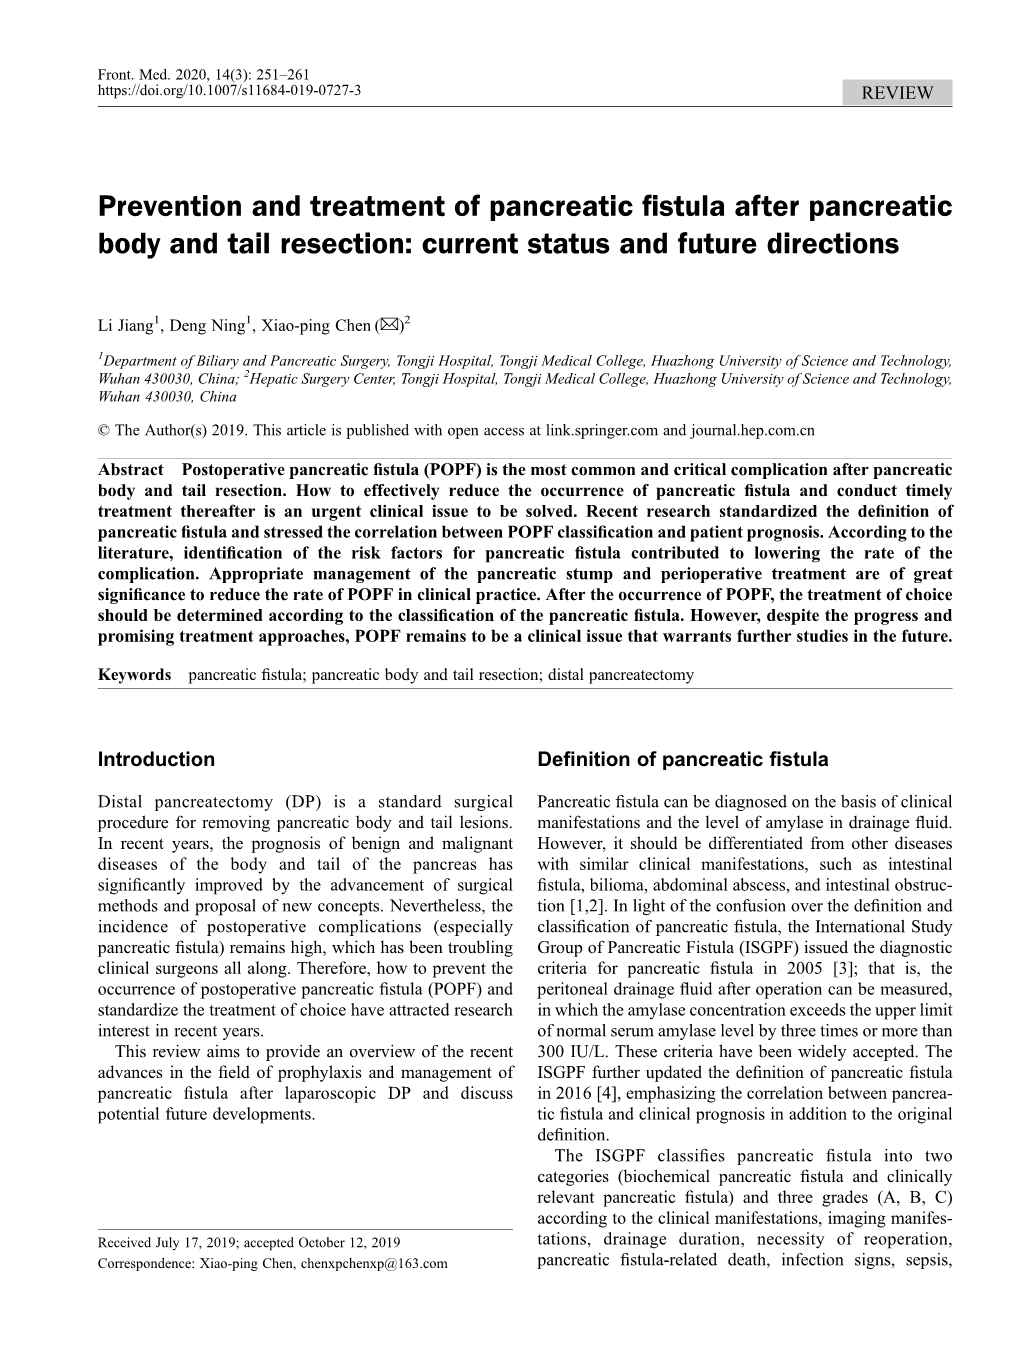 Prevention and Treatment of Pancreatic Fistula After Pancreatic Body and Tail Resection: Current Status and Future Directions